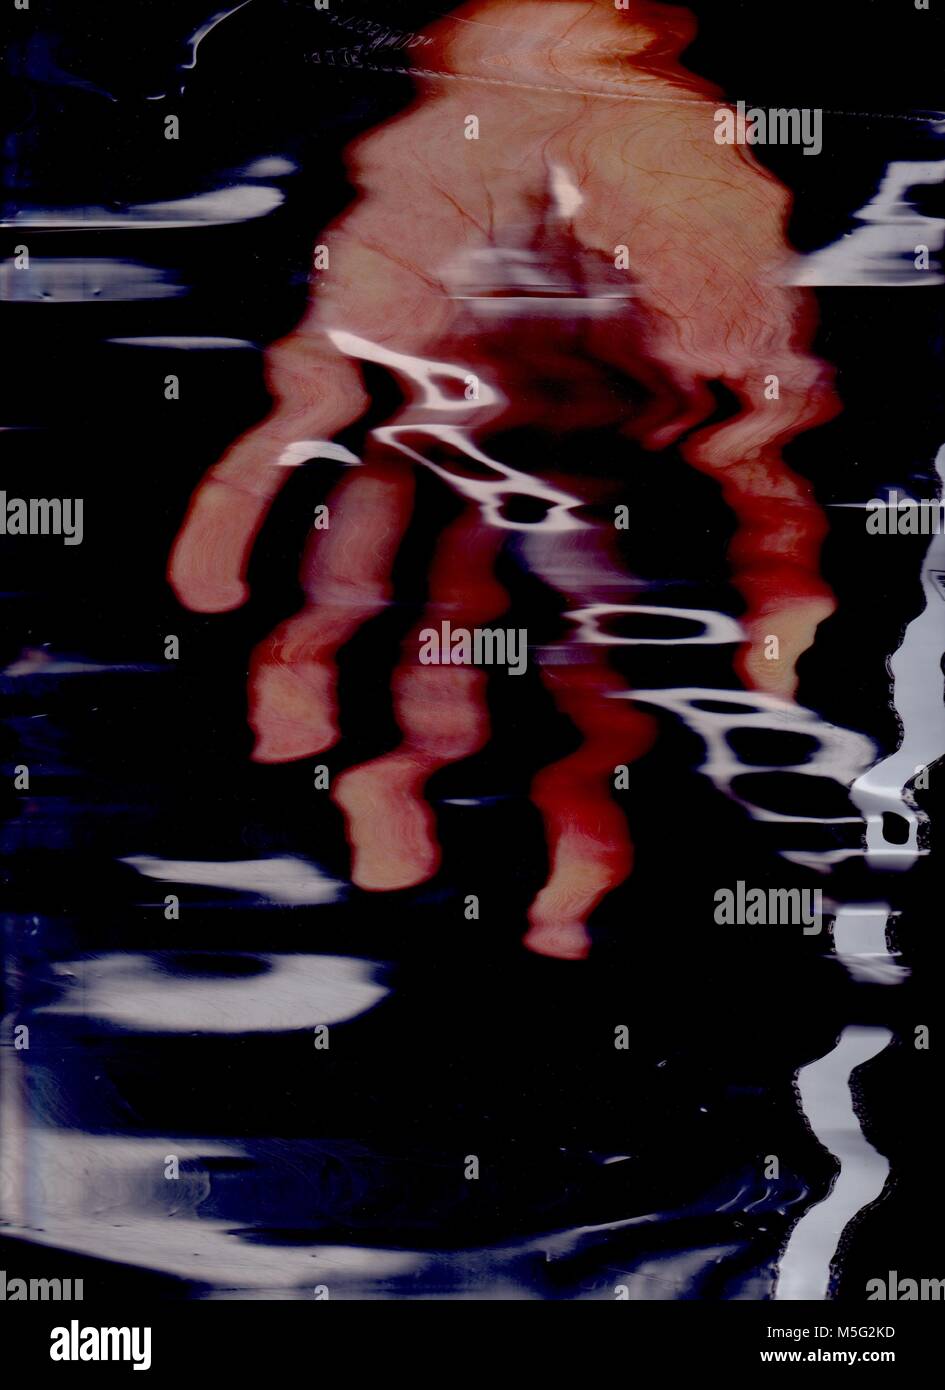 Abstract scanner art Stock Photo - Alamy